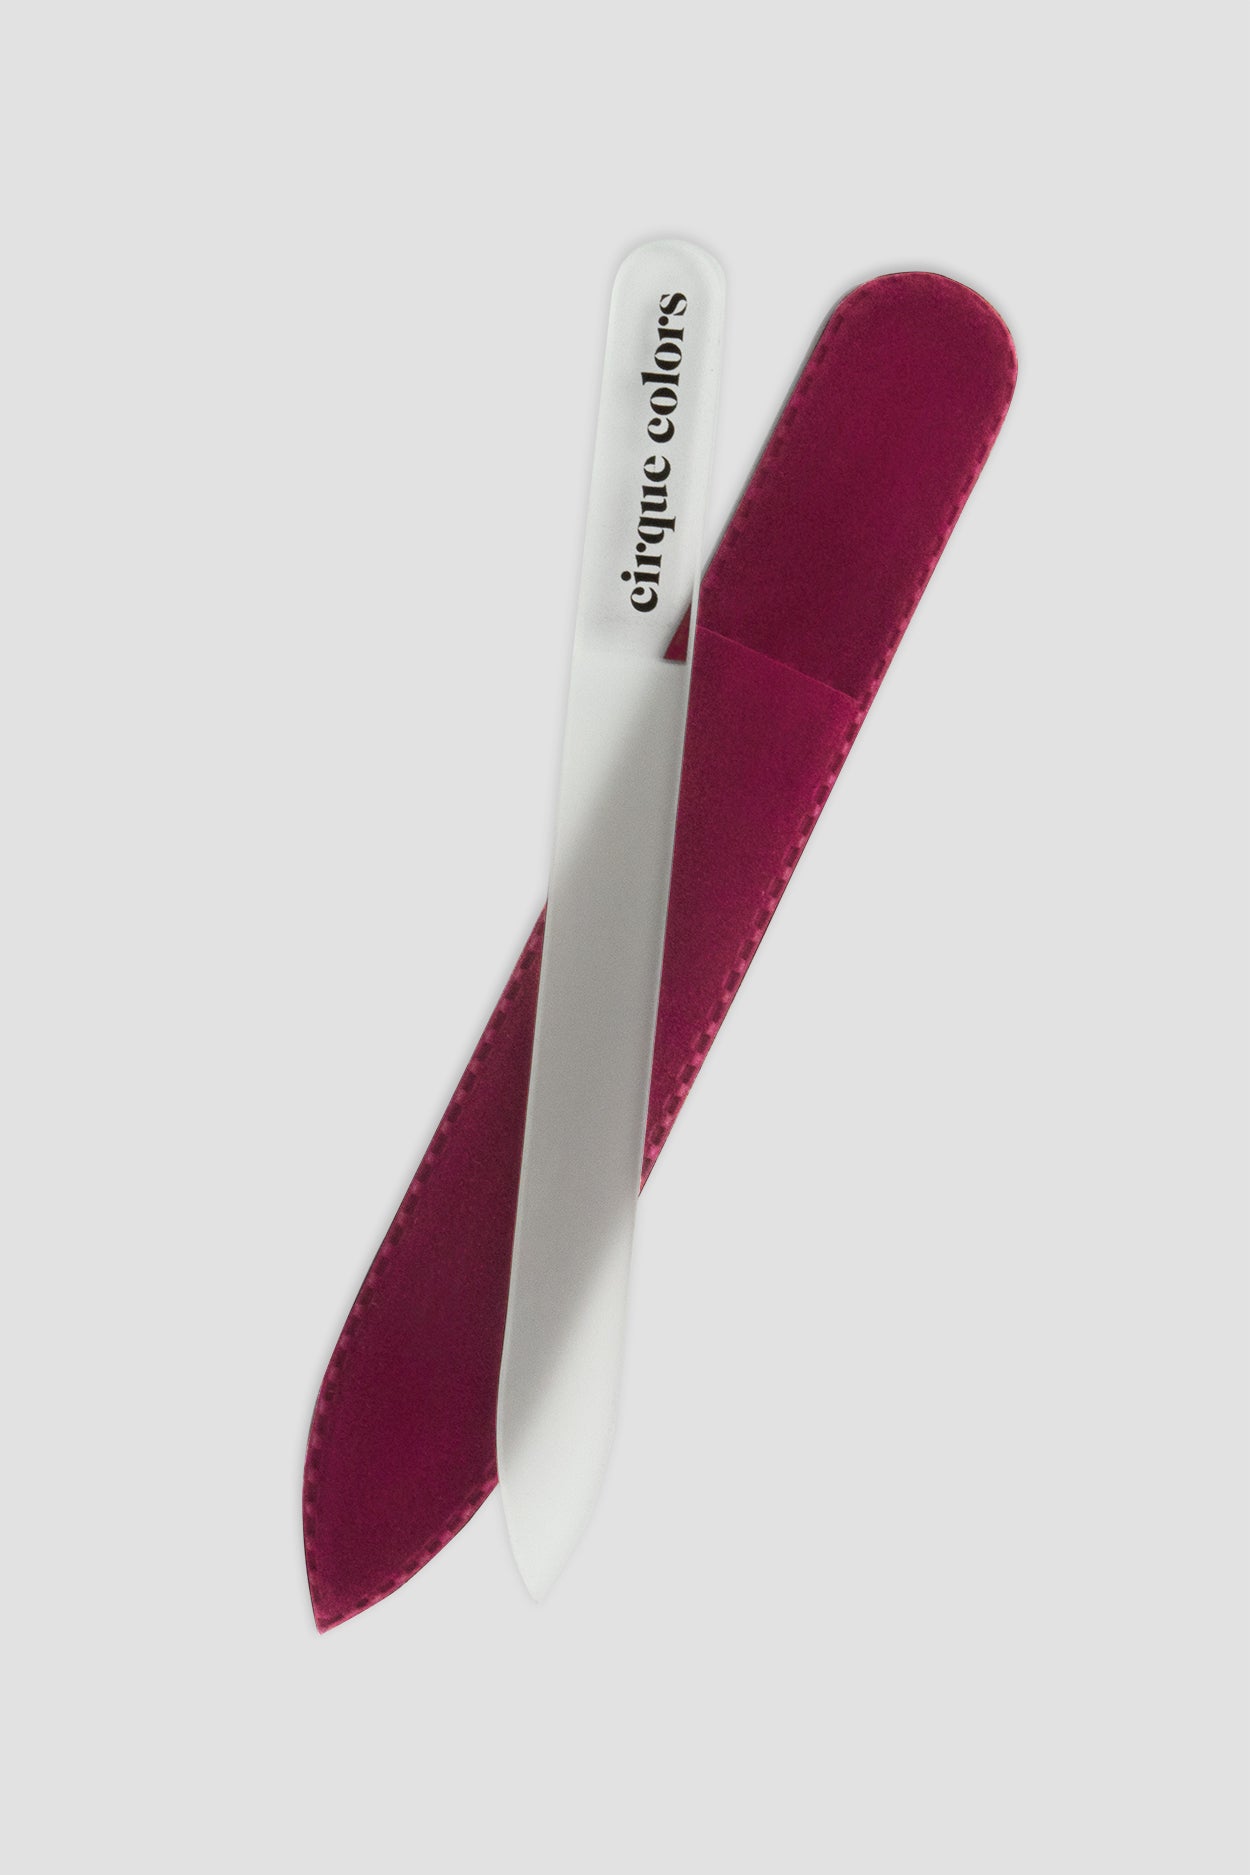 The History and Science of Glass Nail Files